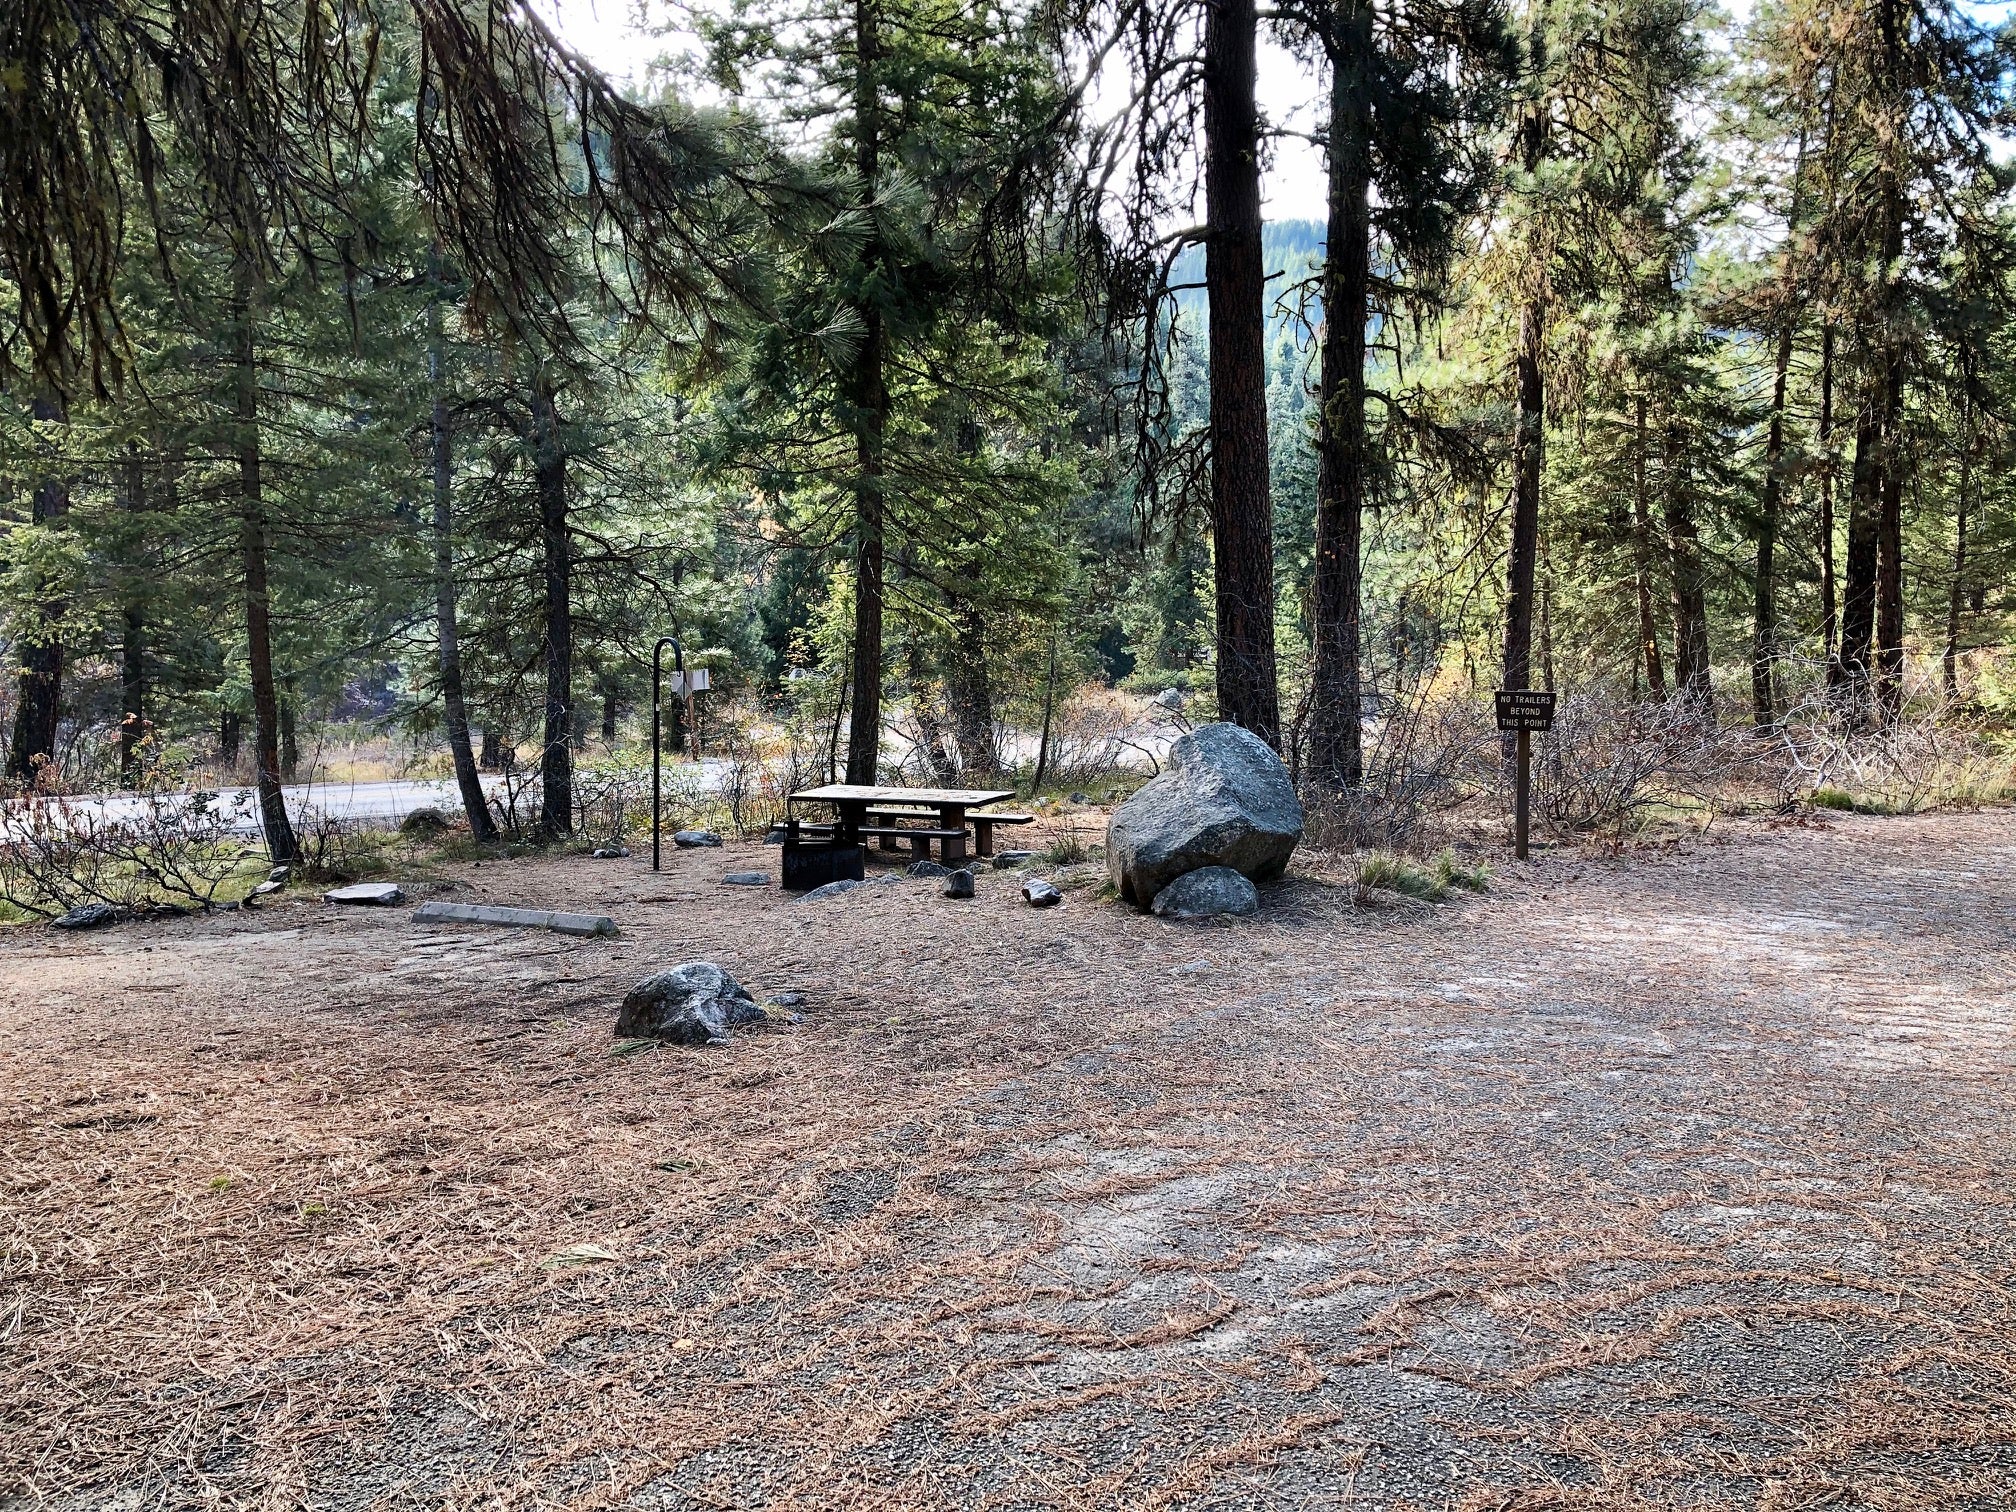 You can see how close this campground is to HWY 21